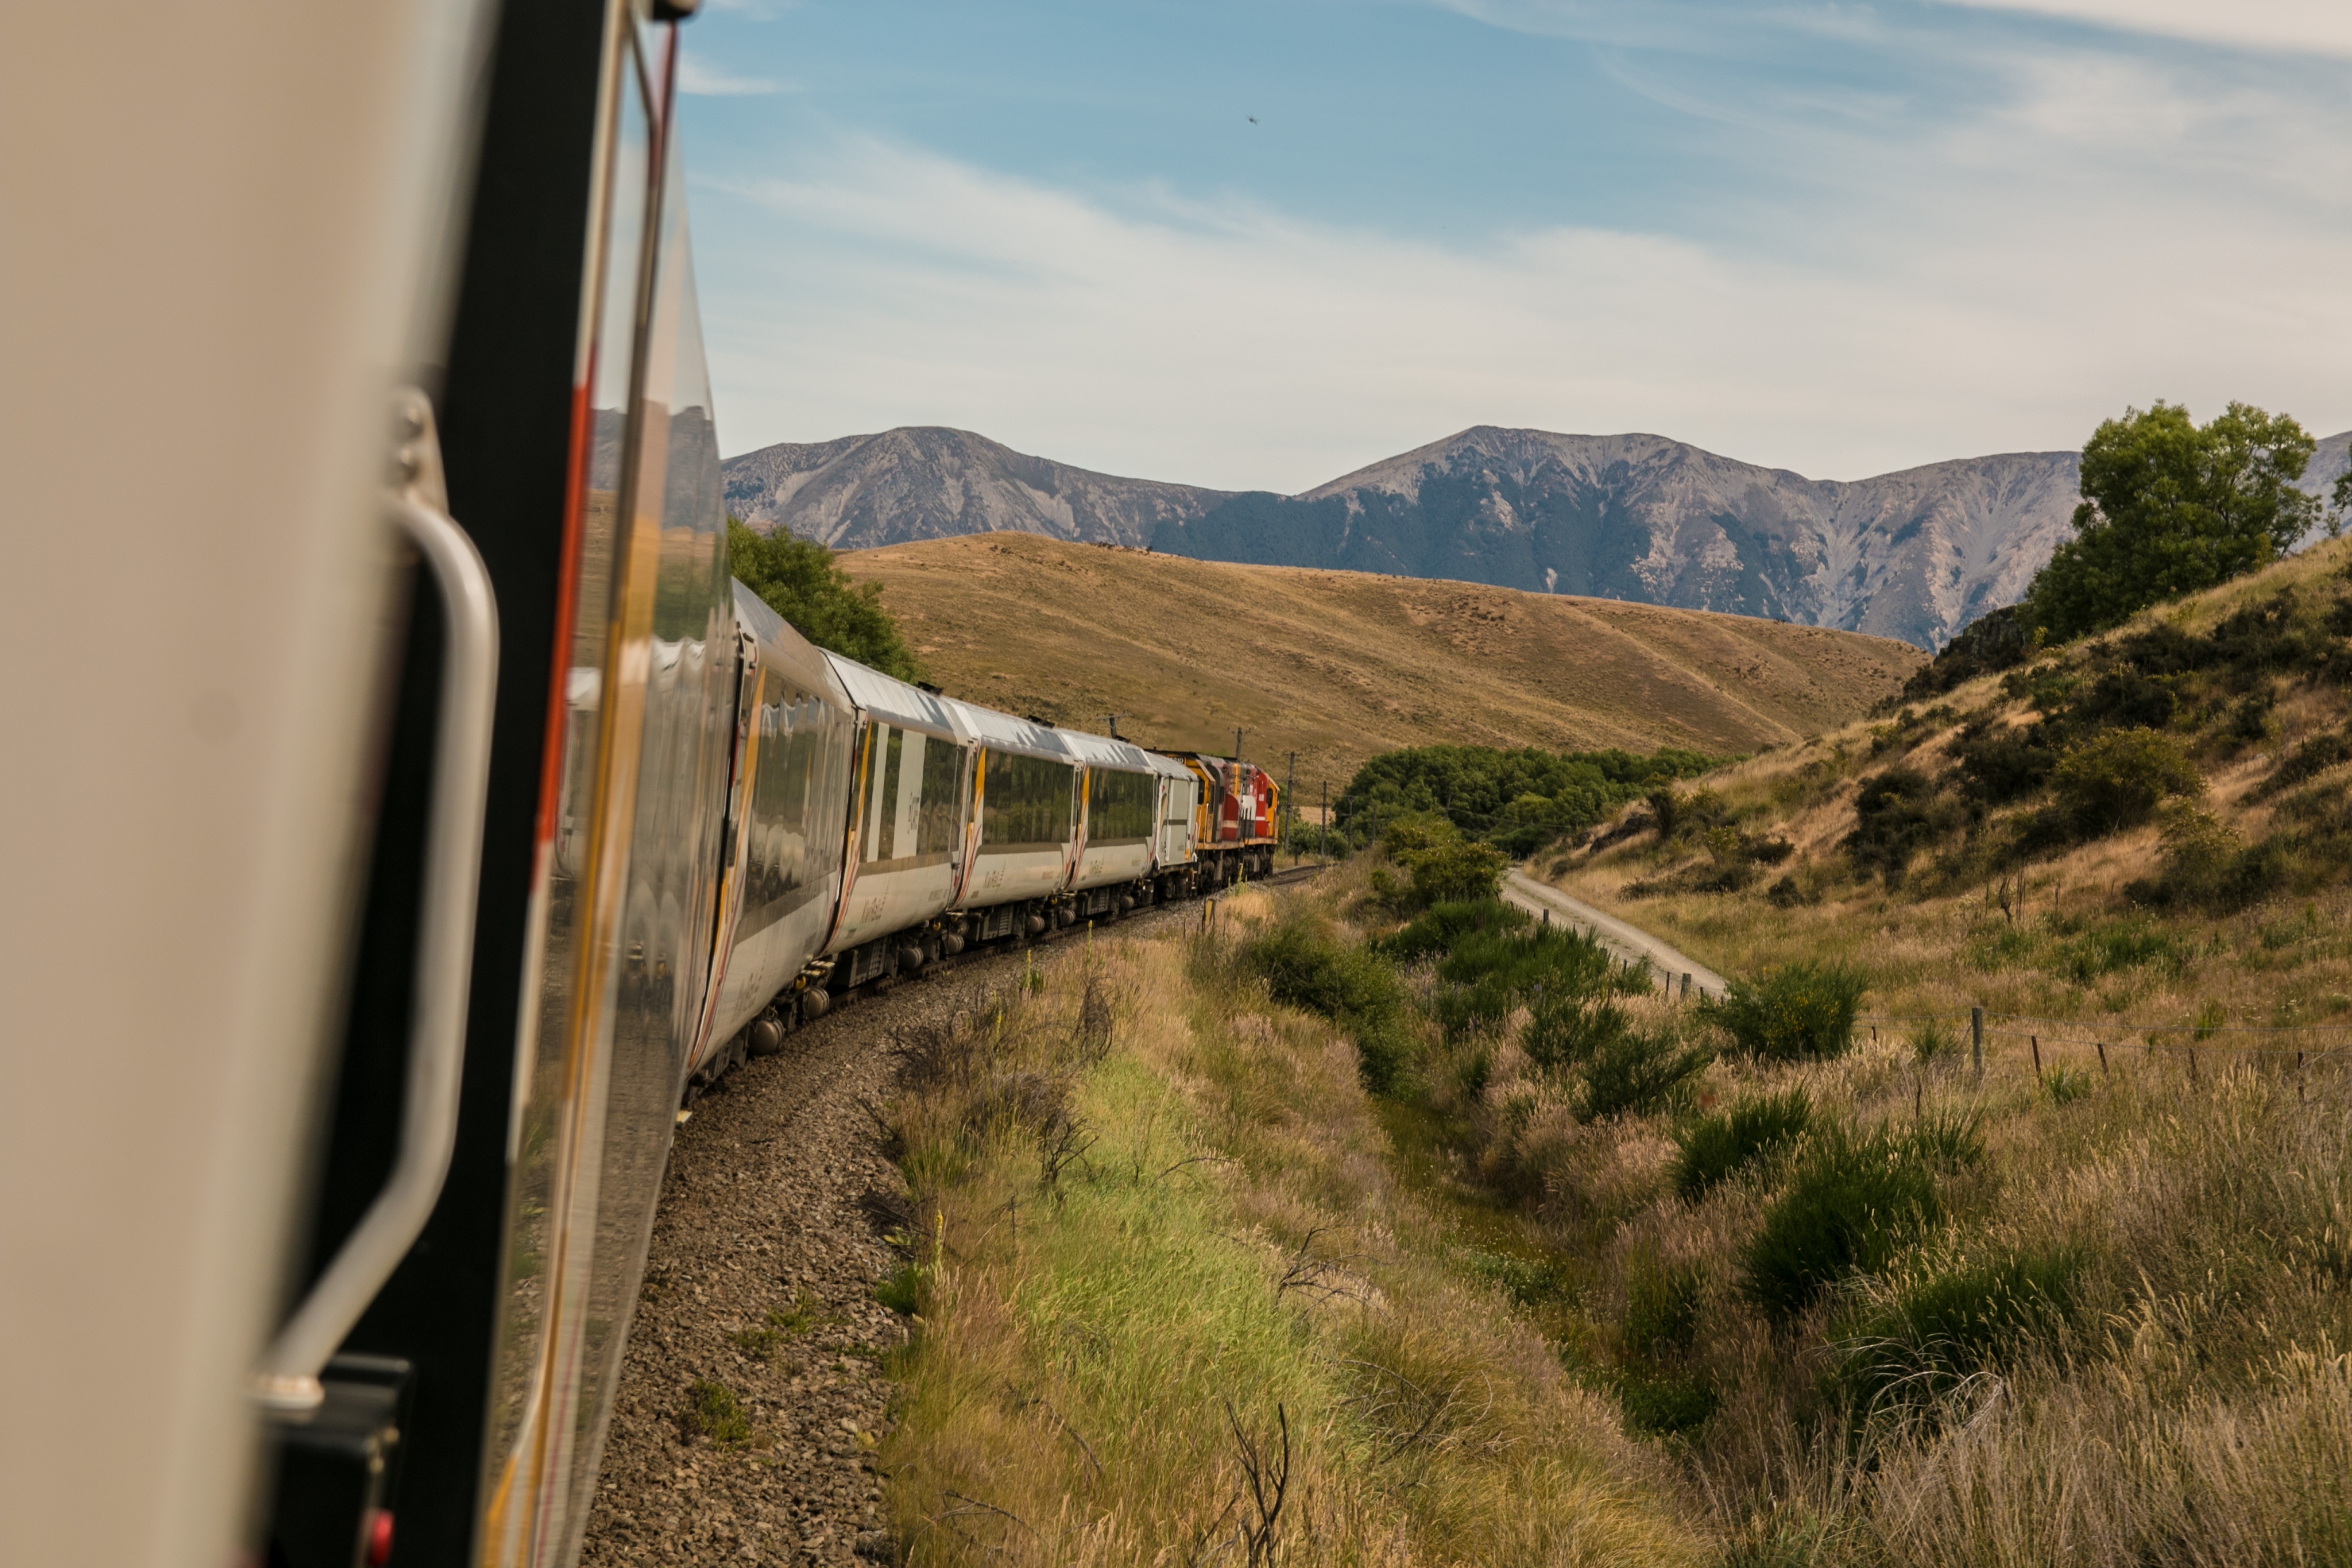 Discovering Italy by train